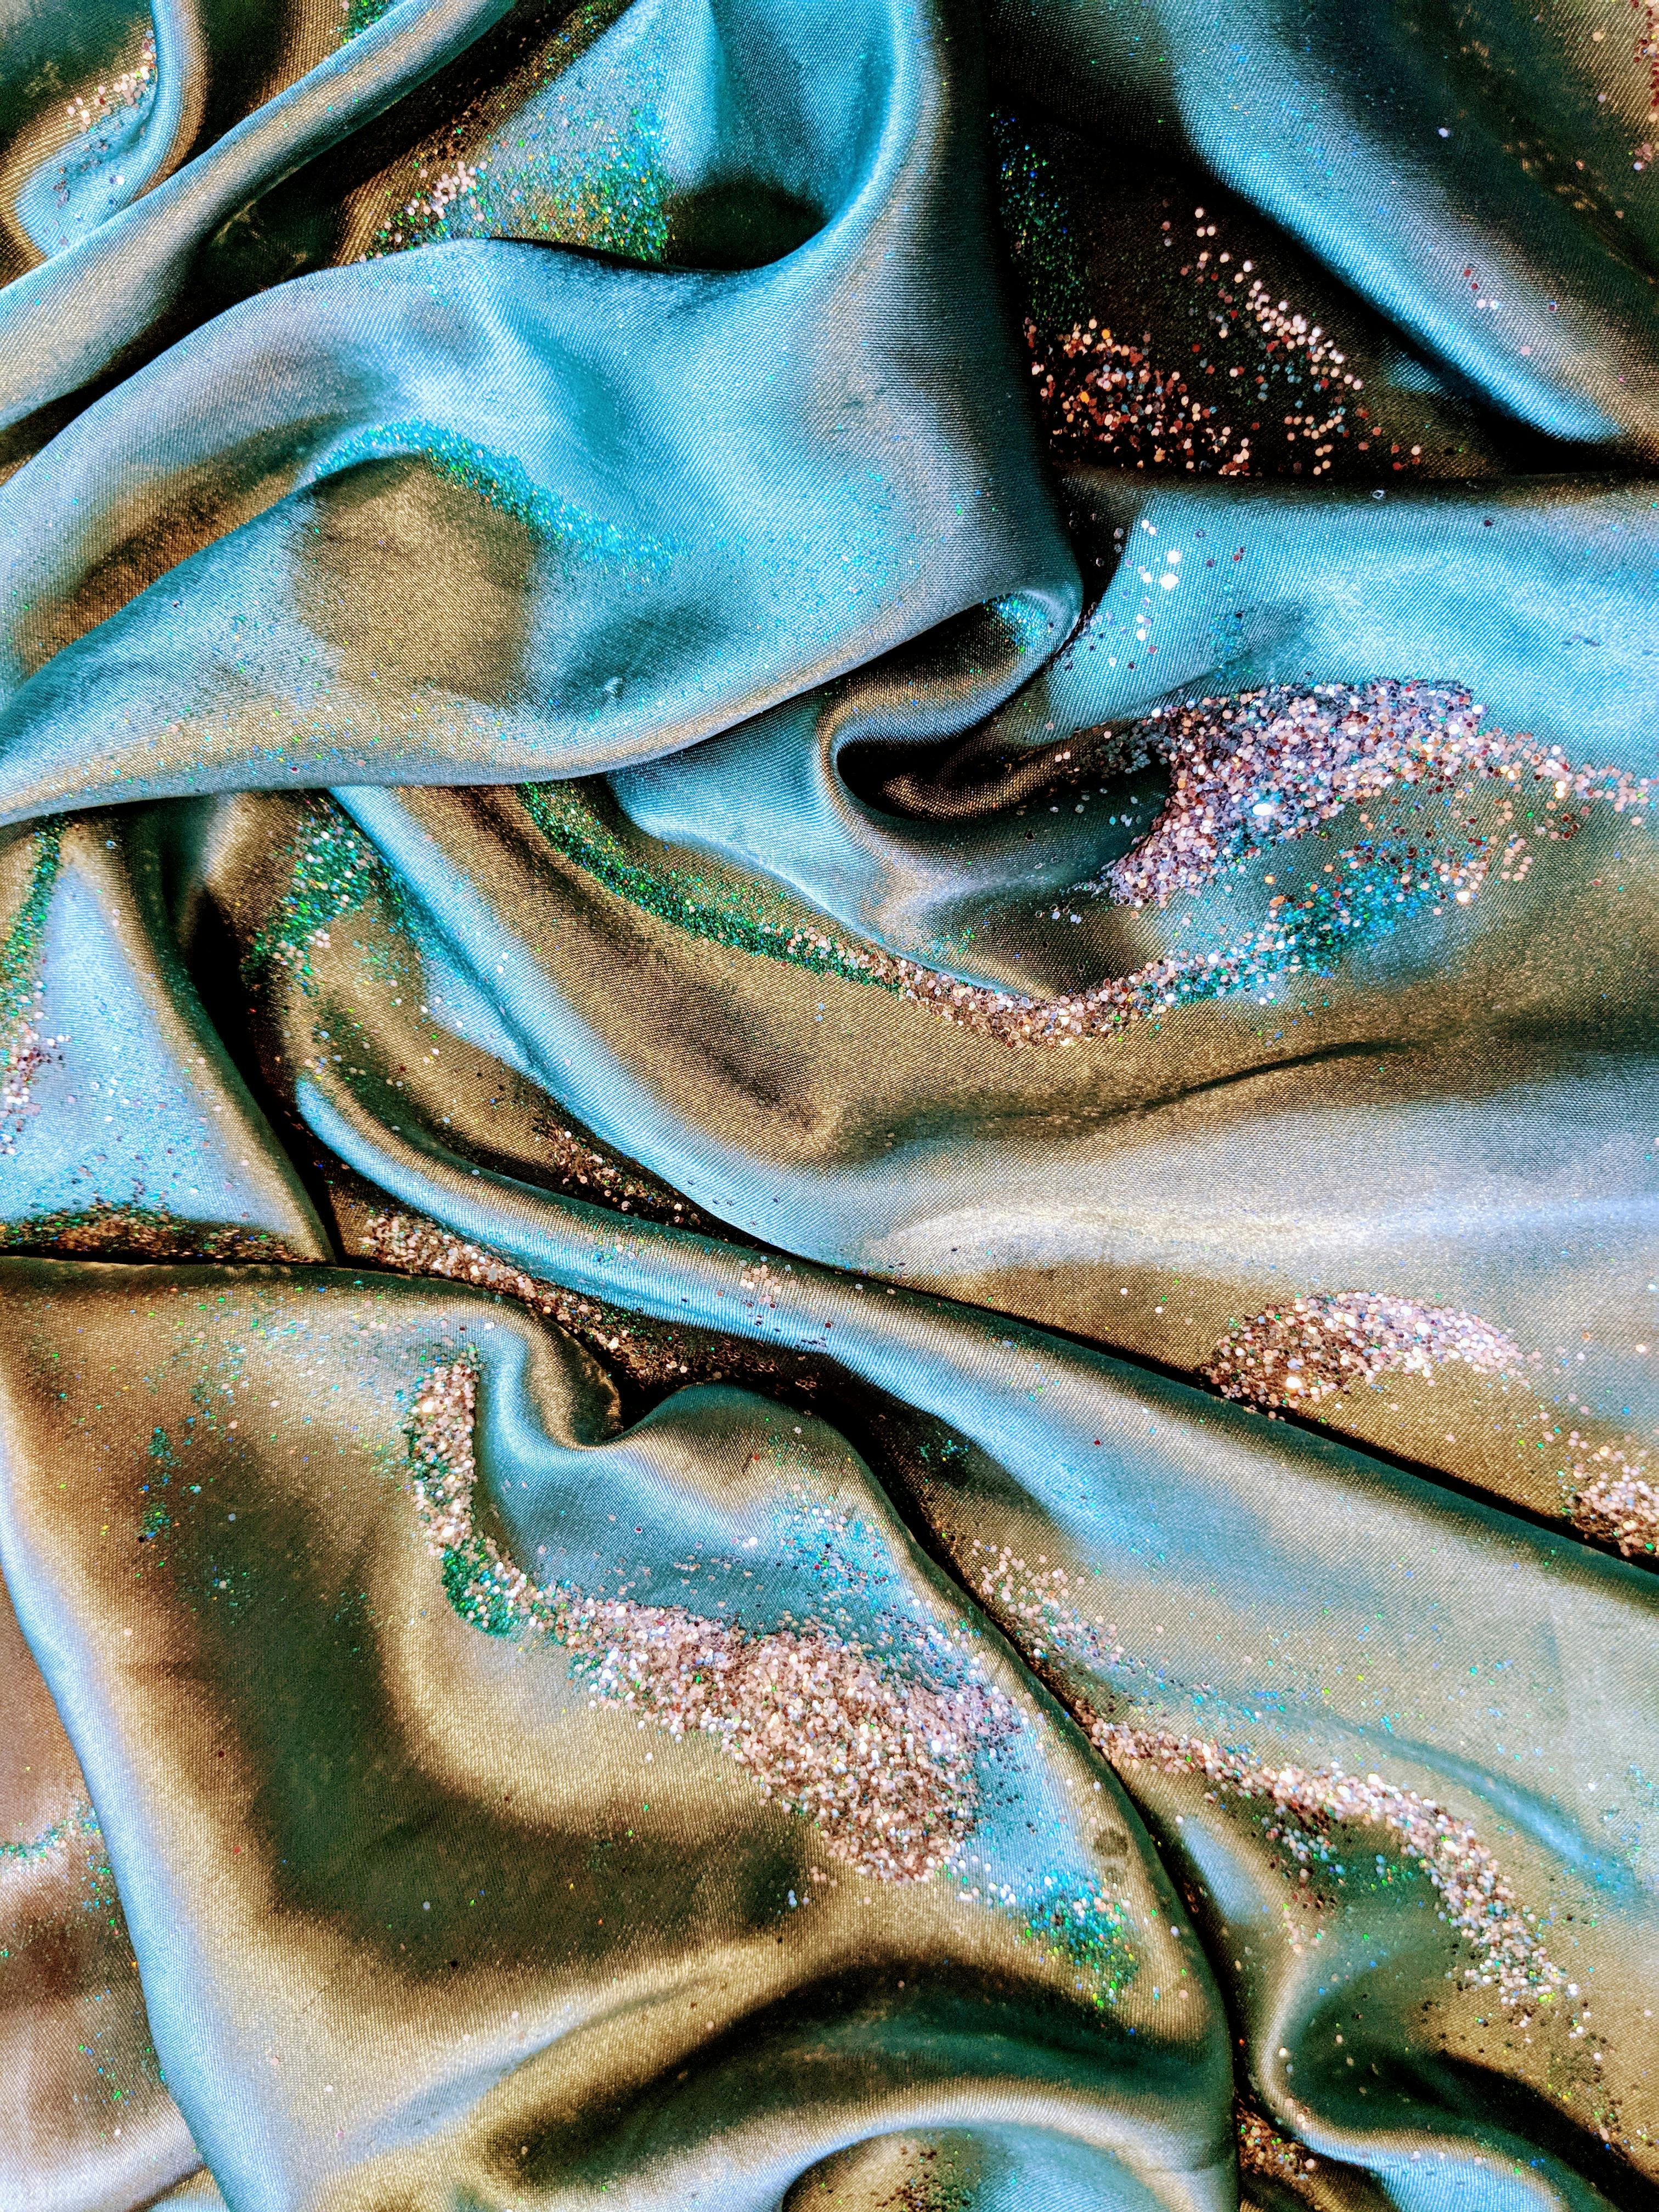 Free stock photo of satin sheets, turquoise